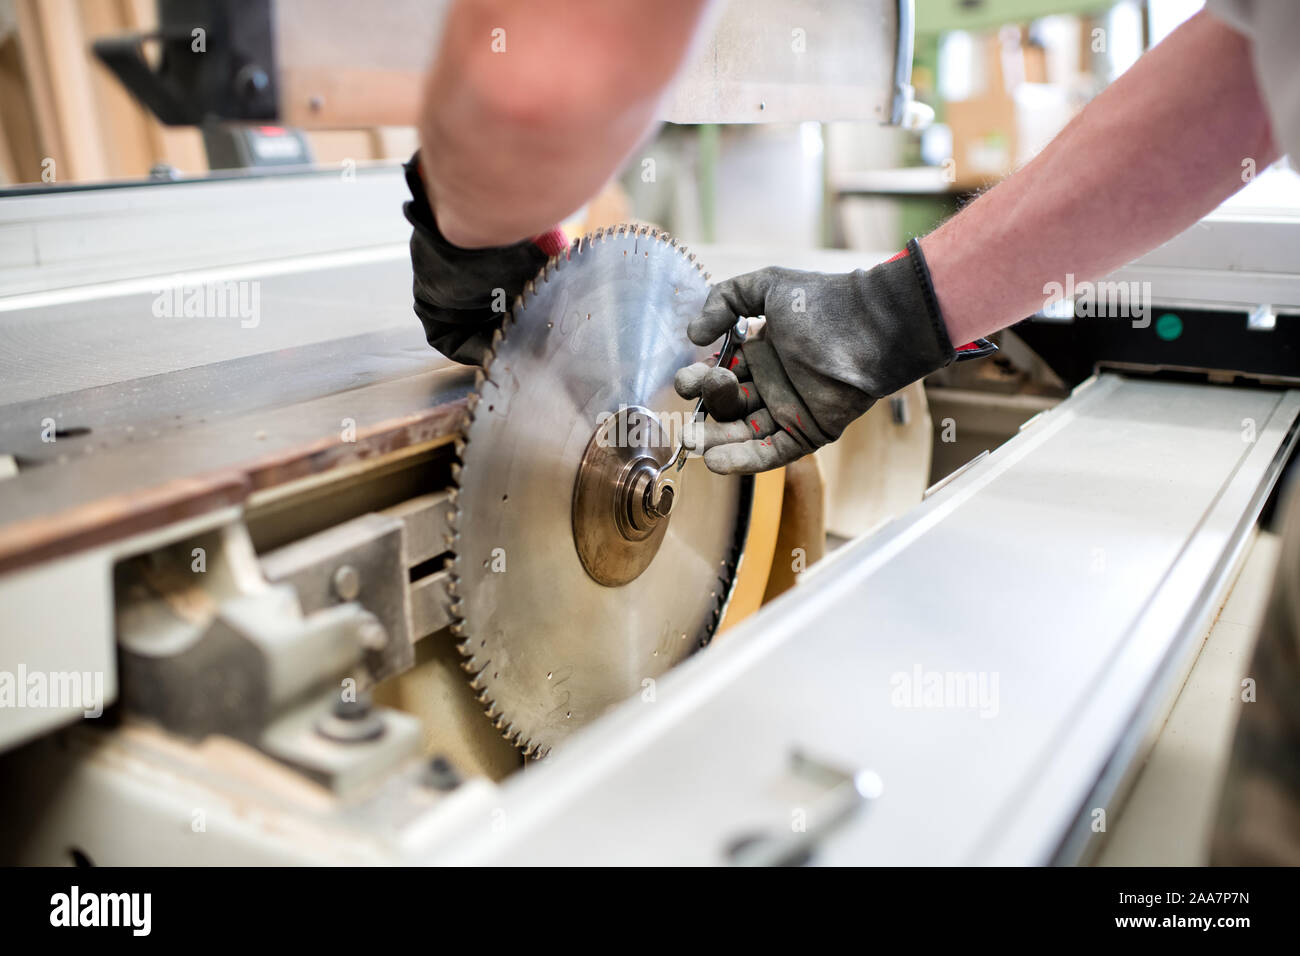 Carpenter in a workshop changing a circular saw blade in a close up on the machine and his gloved hands Stock Photo